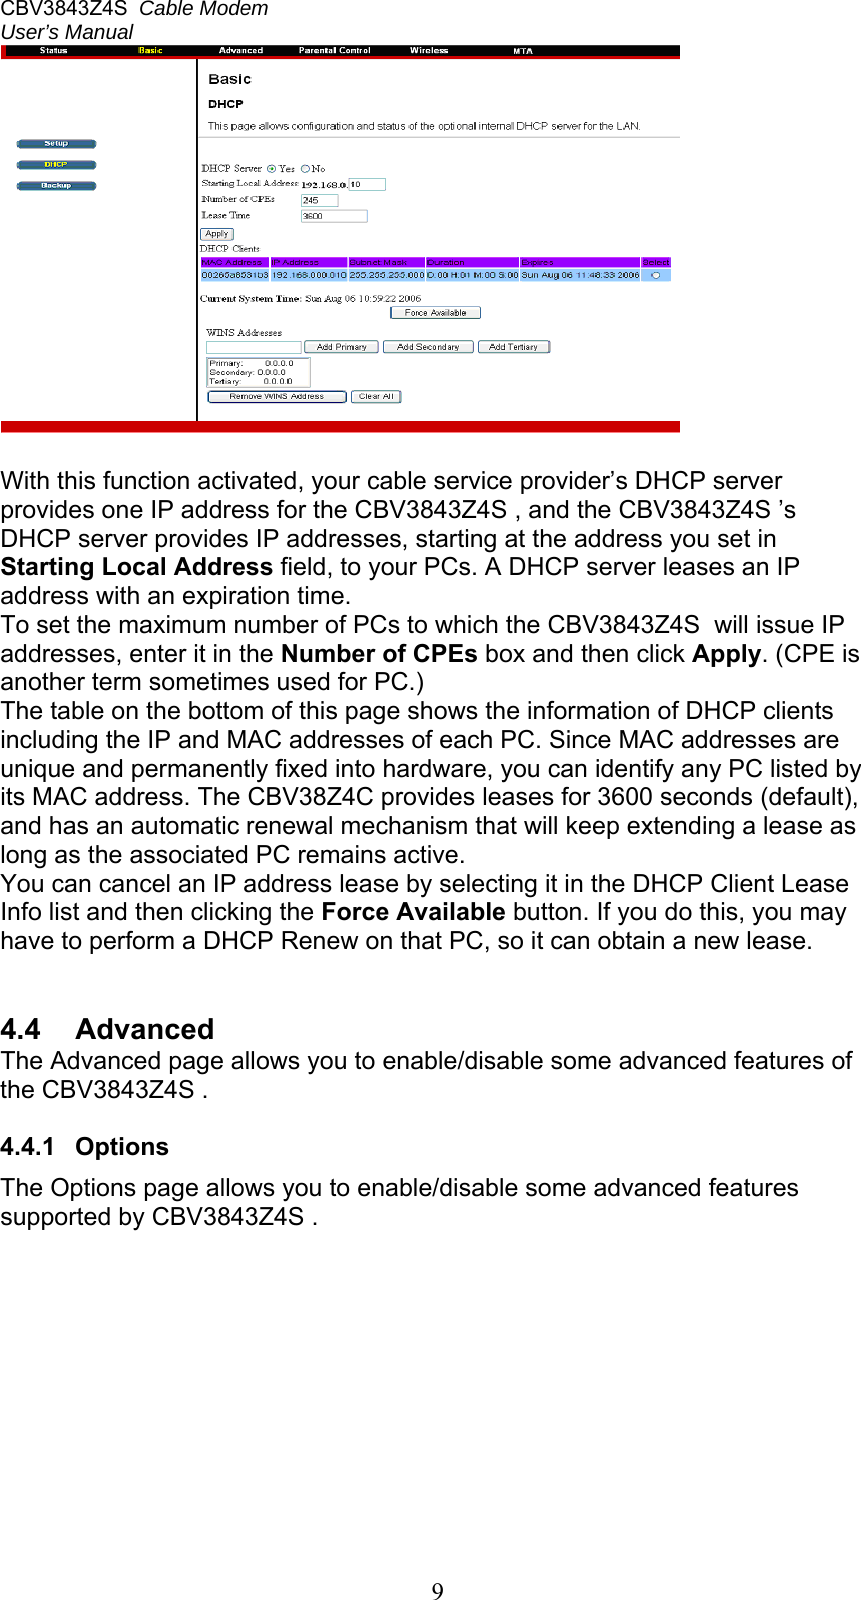 CBV3843Z4S  Cable Modem  User’s Manual   9  With this function activated, your cable service provider’s DHCP server provides one IP address for the CBV3843Z4S , and the CBV3843Z4S ’s DHCP server provides IP addresses, starting at the address you set in Starting Local Address field, to your PCs. A DHCP server leases an IP address with an expiration time. To set the maximum number of PCs to which the CBV3843Z4S  will issue IP addresses, enter it in the Number of CPEs box and then click Apply. (CPE is another term sometimes used for PC.) The table on the bottom of this page shows the information of DHCP clients including the IP and MAC addresses of each PC. Since MAC addresses are unique and permanently fixed into hardware, you can identify any PC listed by its MAC address. The CBV38Z4C provides leases for 3600 seconds (default), and has an automatic renewal mechanism that will keep extending a lease as long as the associated PC remains active. You can cancel an IP address lease by selecting it in the DHCP Client Lease Info list and then clicking the Force Available button. If you do this, you may have to perform a DHCP Renew on that PC, so it can obtain a new lease.   4.4  Advanced The Advanced page allows you to enable/disable some advanced features of the CBV3843Z4S .  4.4.1  Options The Options page allows you to enable/disable some advanced features supported by CBV3843Z4S .  